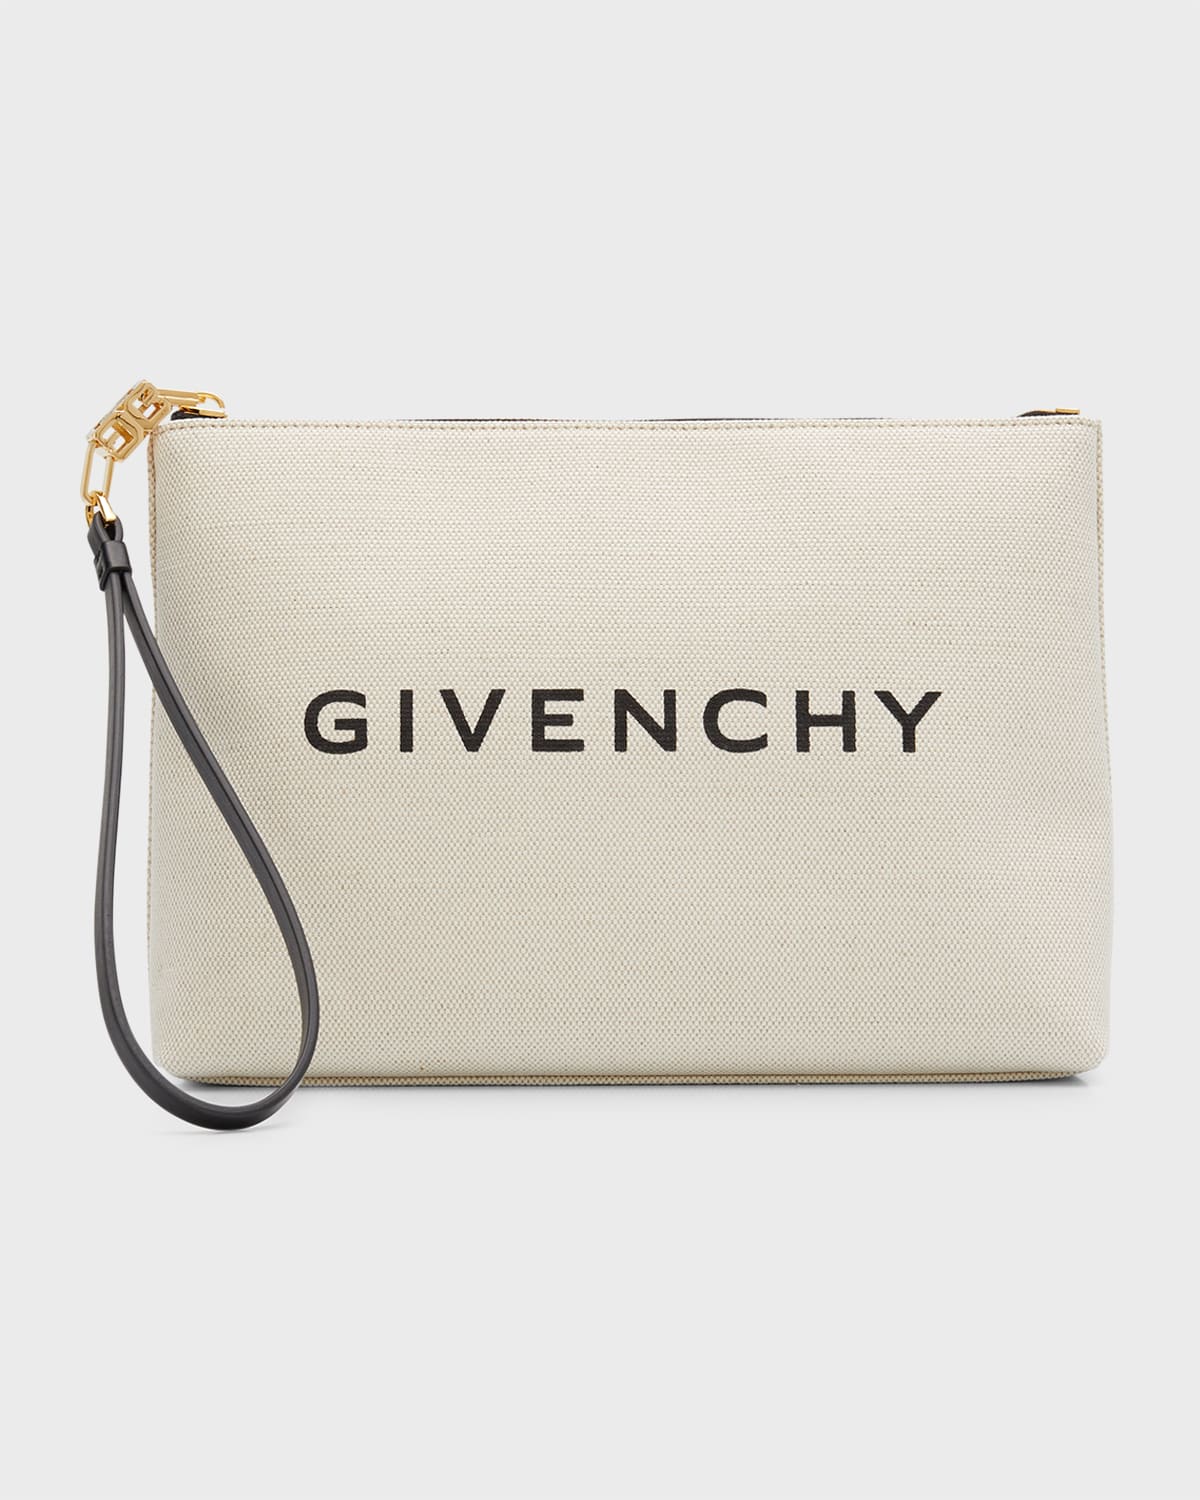 GIVENCHY LARGE POUCH WRISTLET IN CANVAS